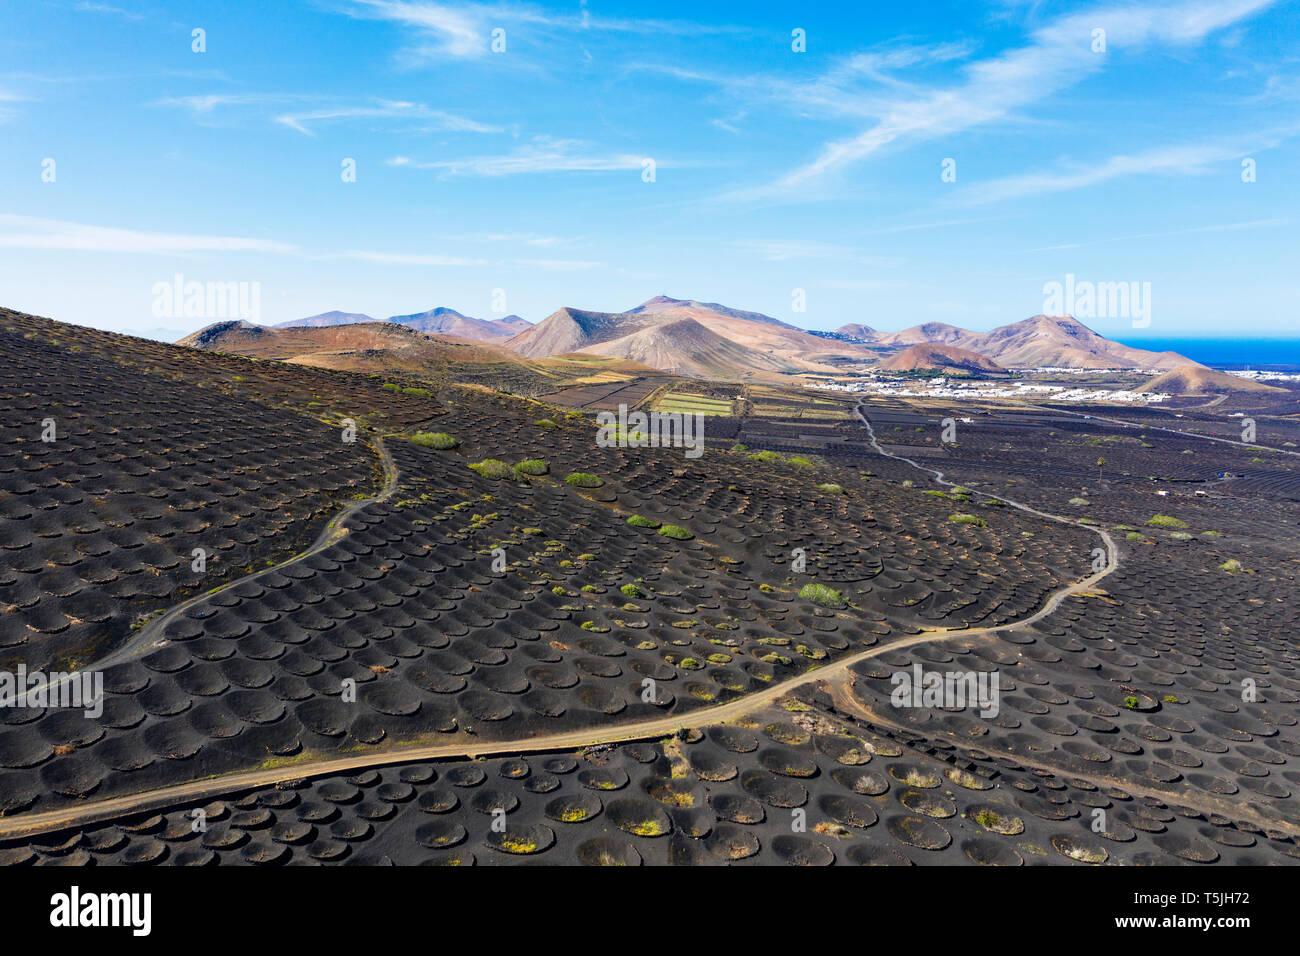 Spain, Canary Islands, Lanzarote, wine growing area La Geria villages Uga and Yaiza, Ajaches mountains, aerial view Stock Photo